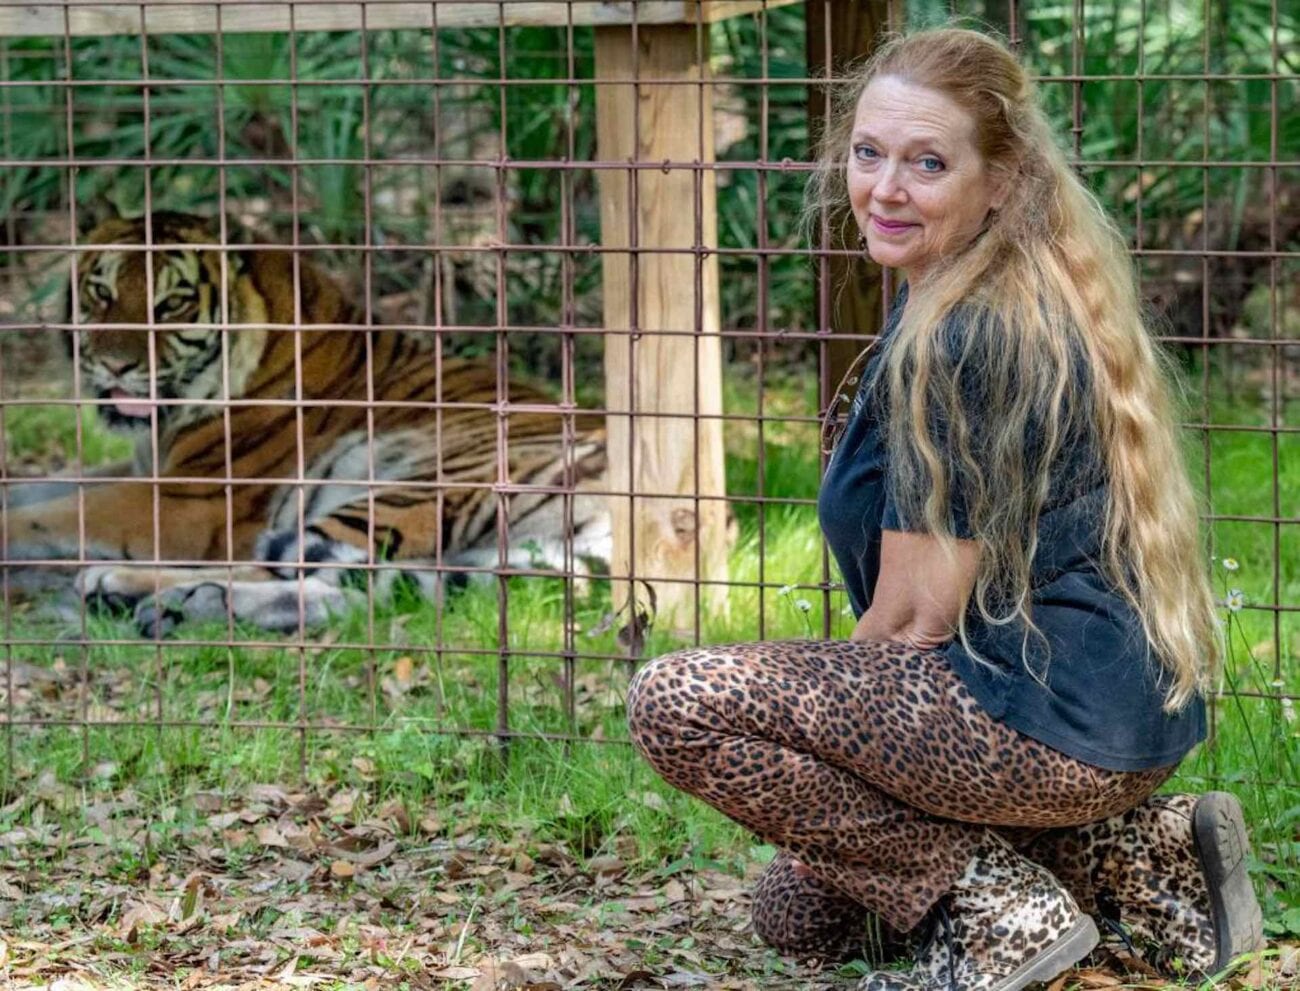 Oh Carole Baskin of 'Tiger King' fame, what do we do with you? Here's what we know about Baskin and her troublesome relationship with 'Tiger King'.